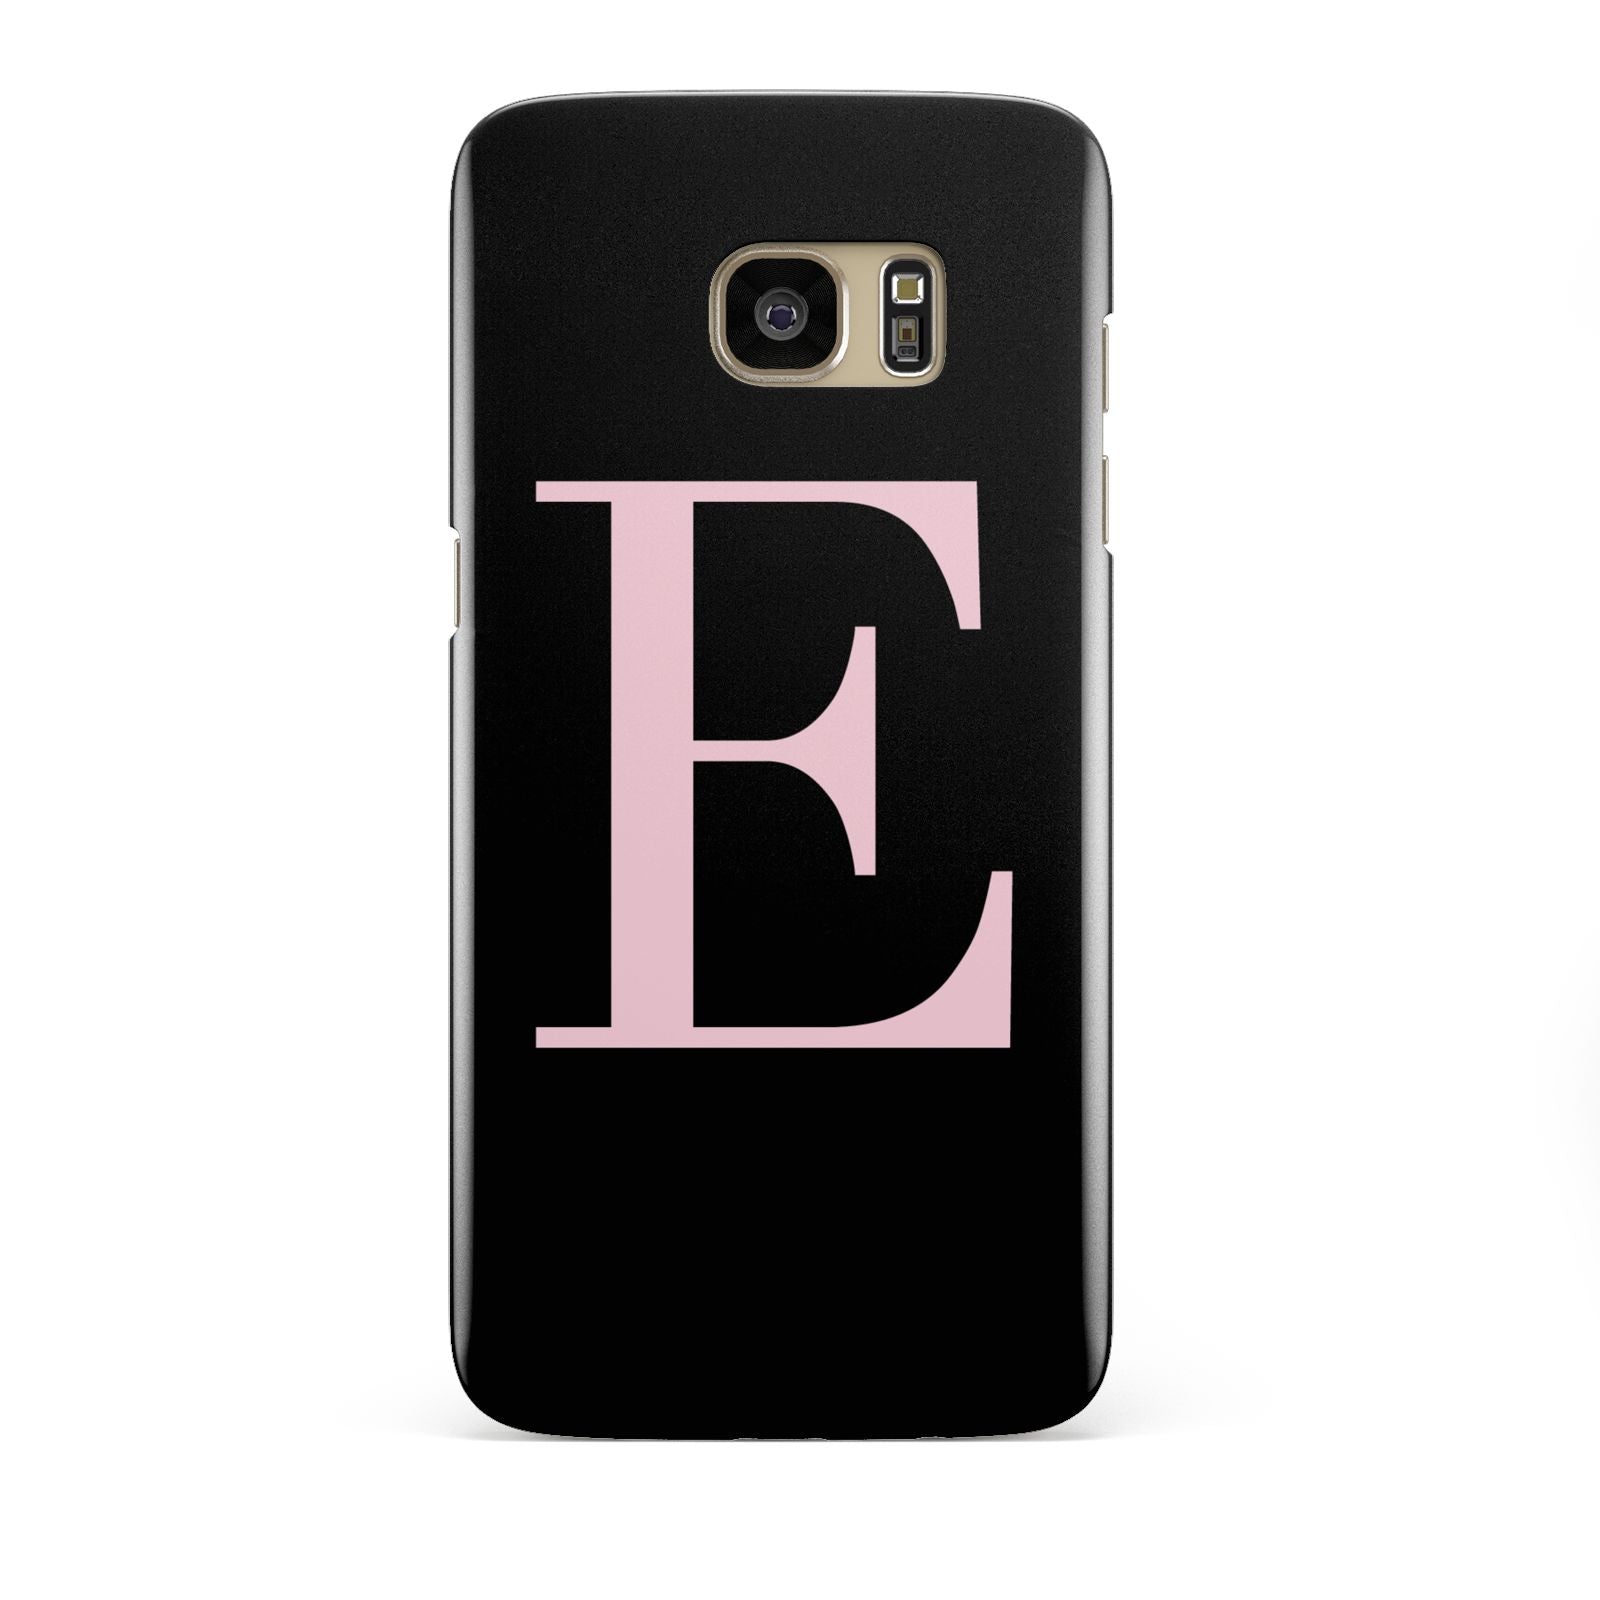 Black with Pink Personalised Monogram Samsung Galaxy S7 Edge Case